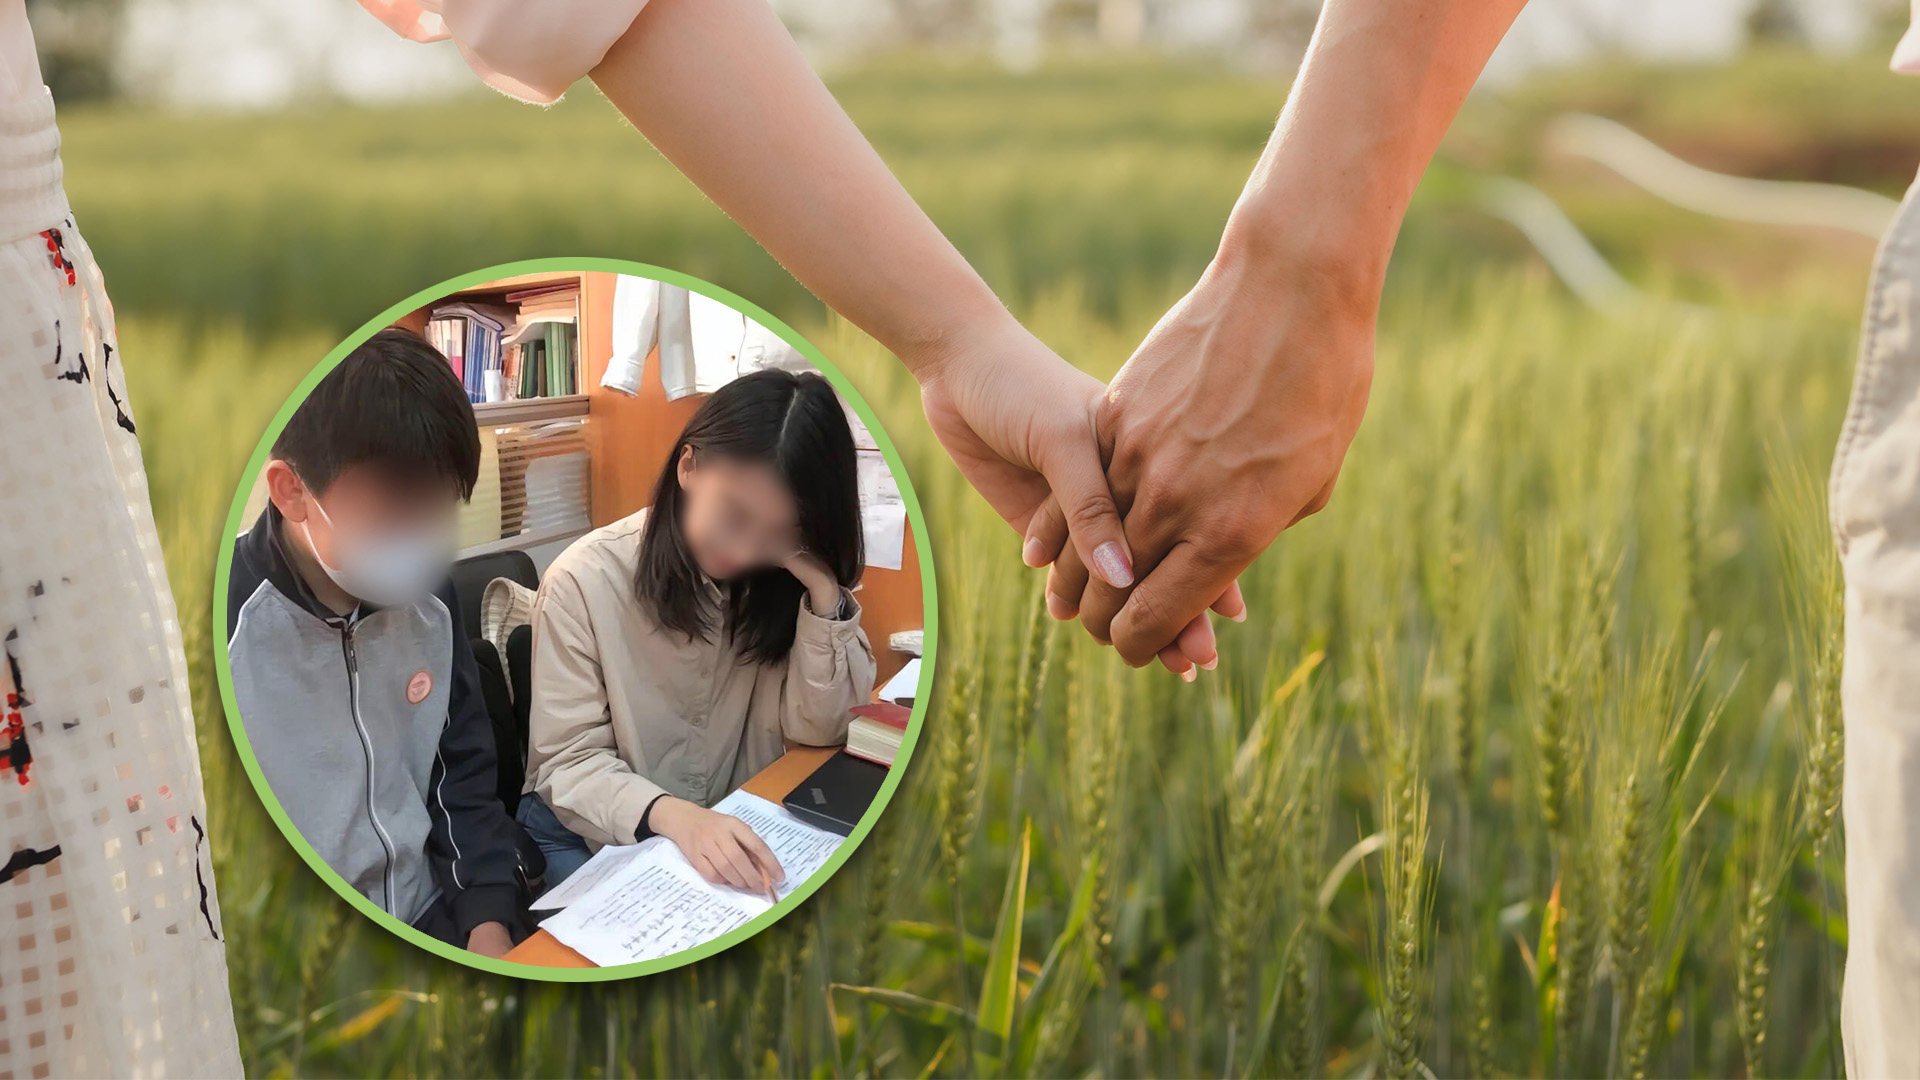 The story of a sex scandal involving a 30-something teacher in China and her 16-year-old male pupil has been viewed 2.5 billion times on mainland social media. Photo: SCMP composite/Shutterstock/Douyin